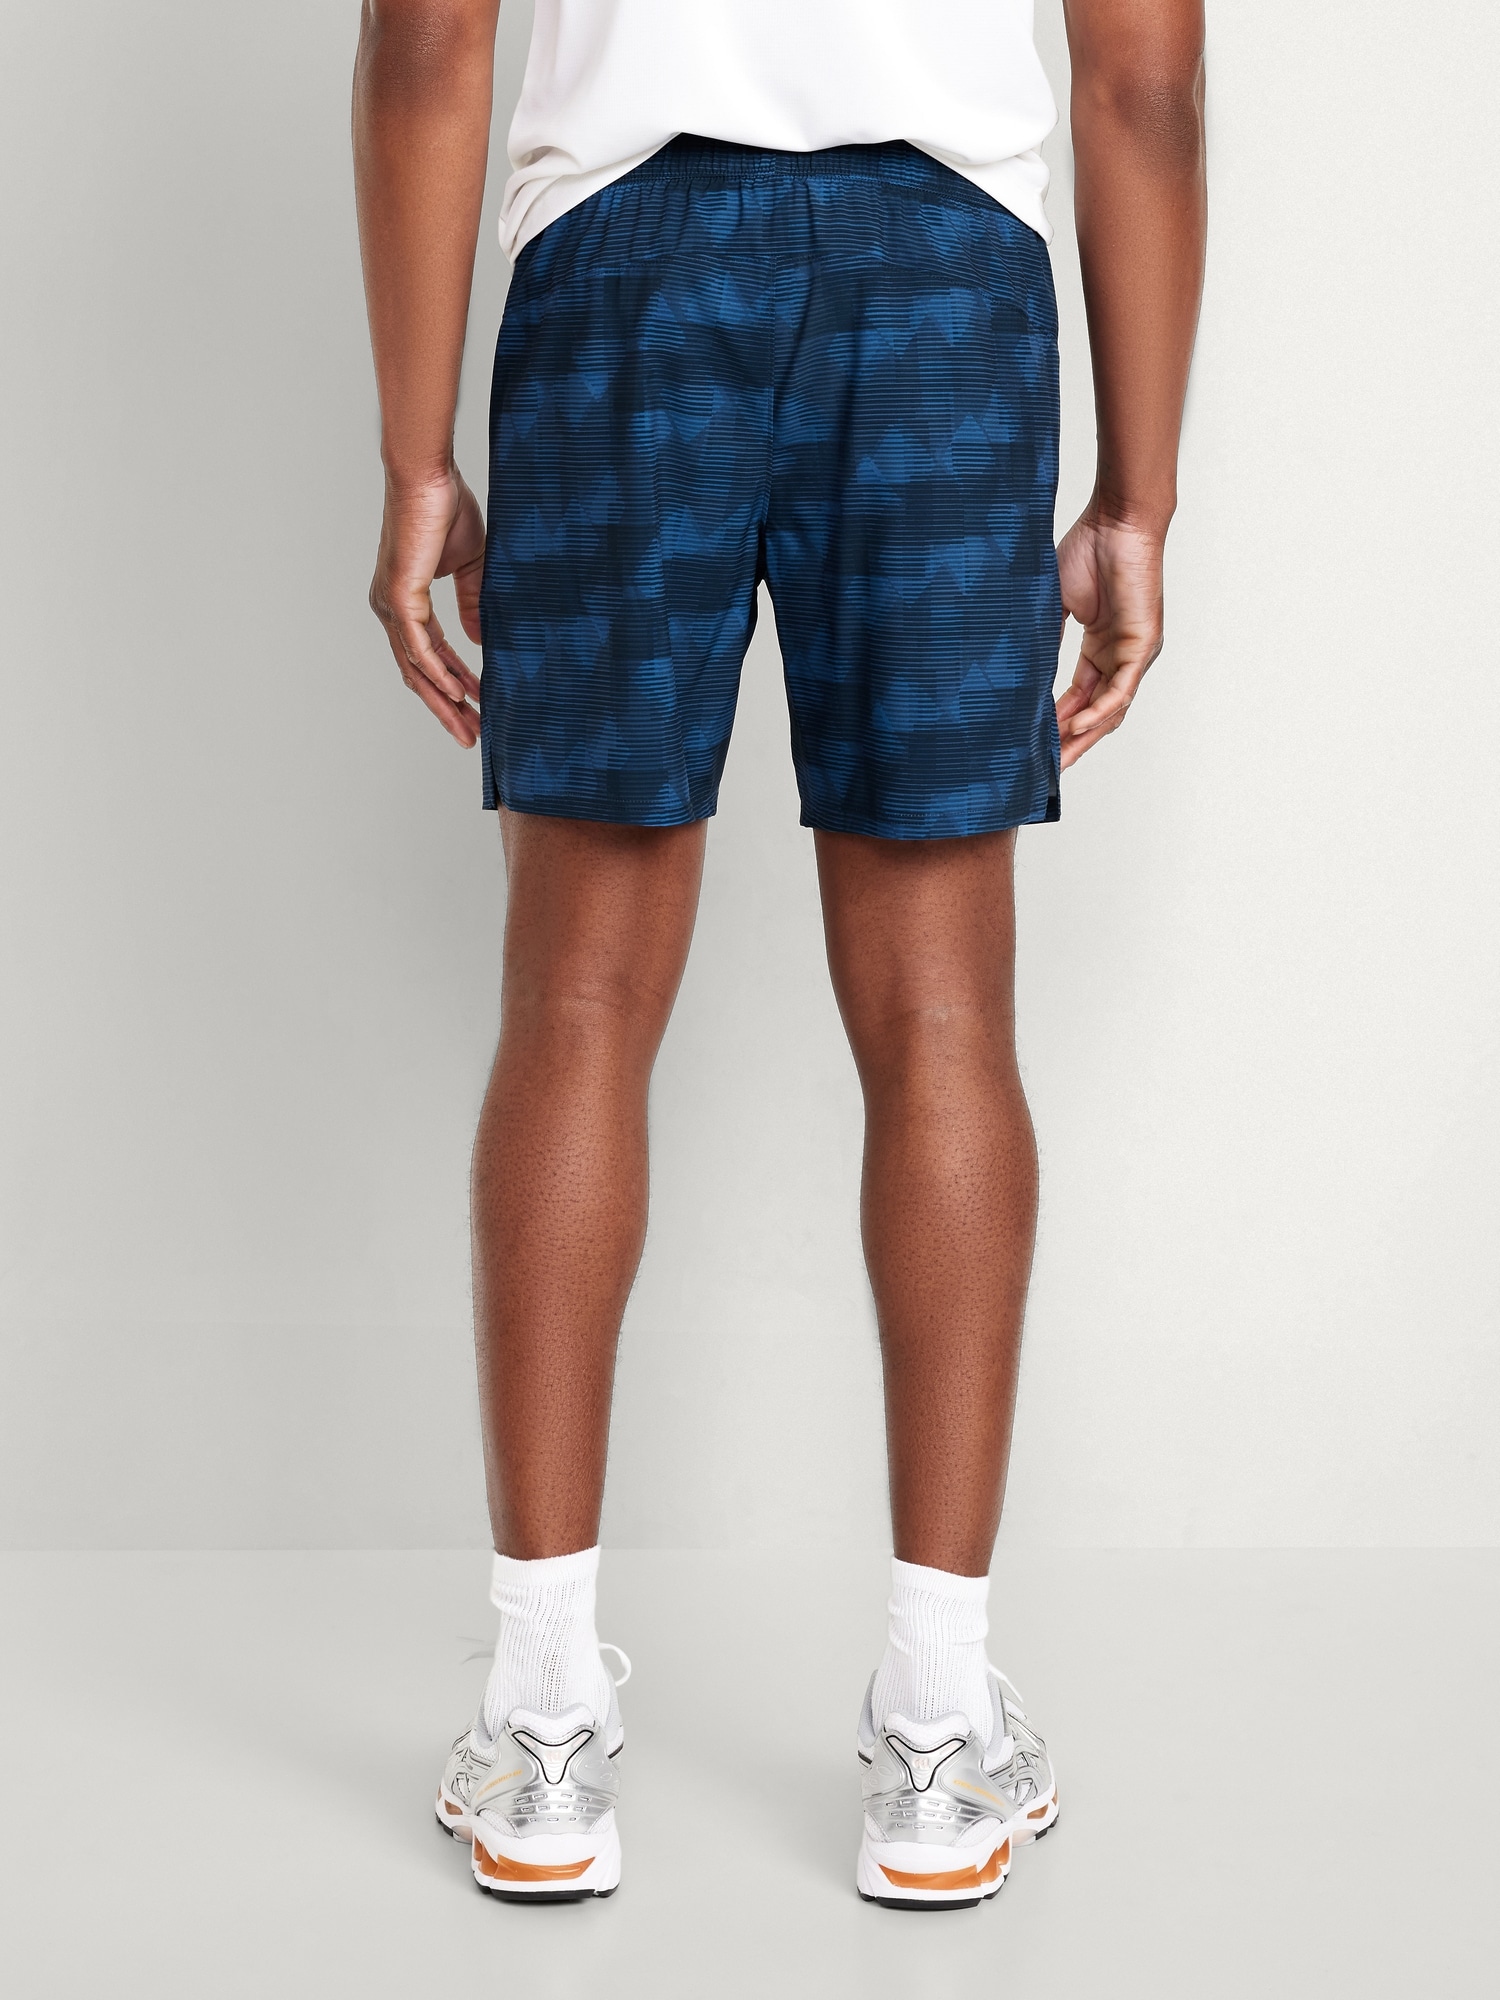 Where can I find men's shorts with a three inch inseam or less